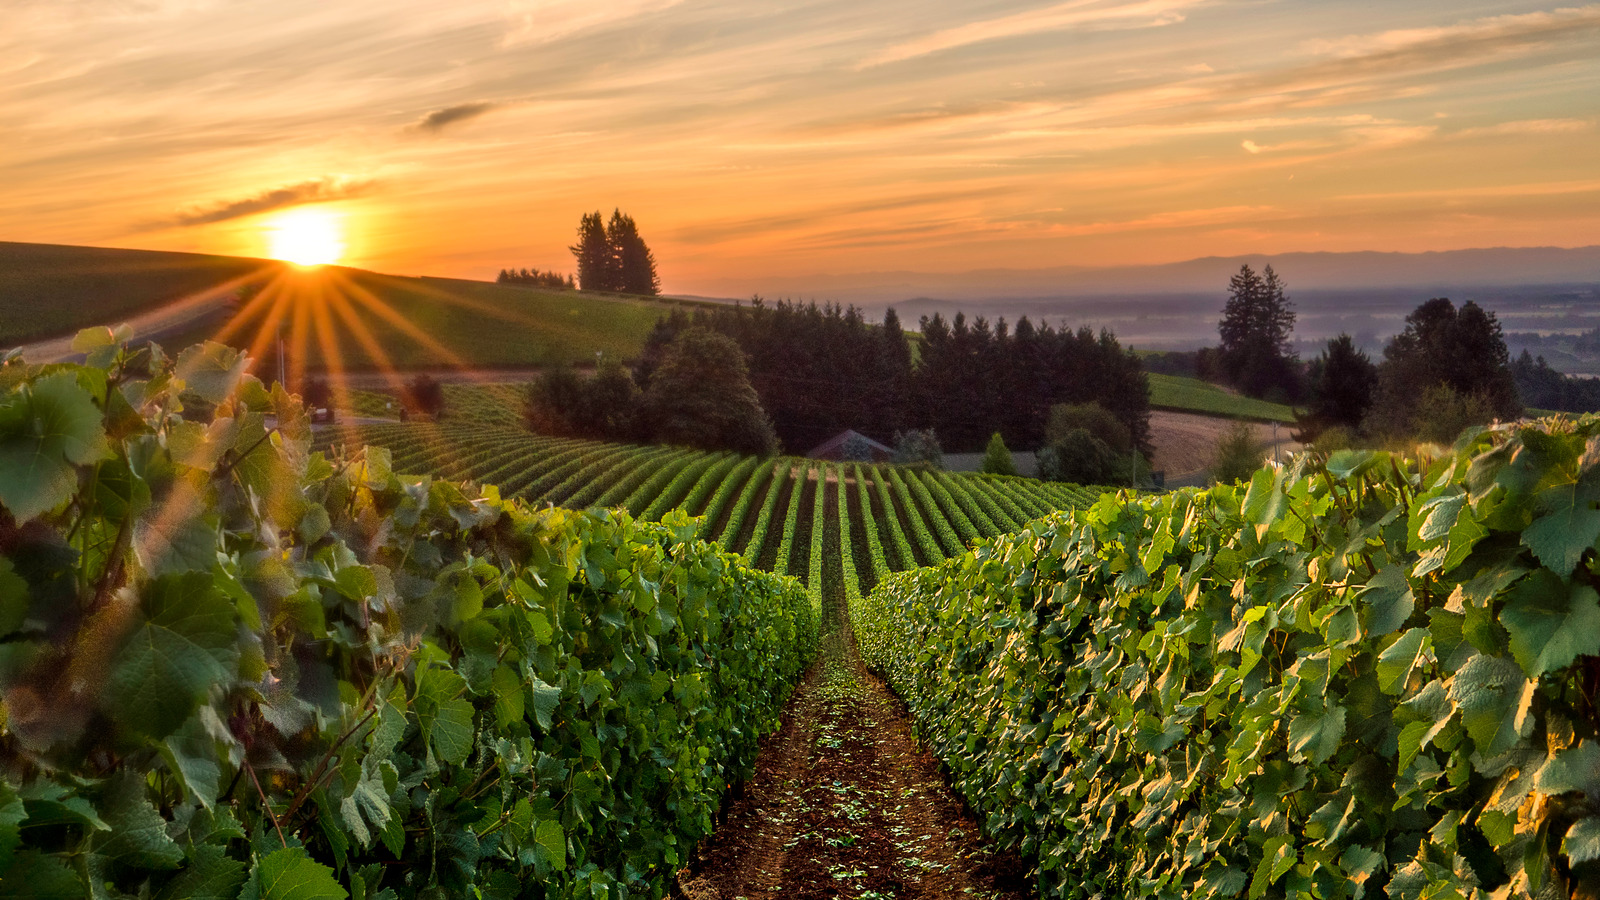 The Beginner's Guide To Willamette Valley Wines